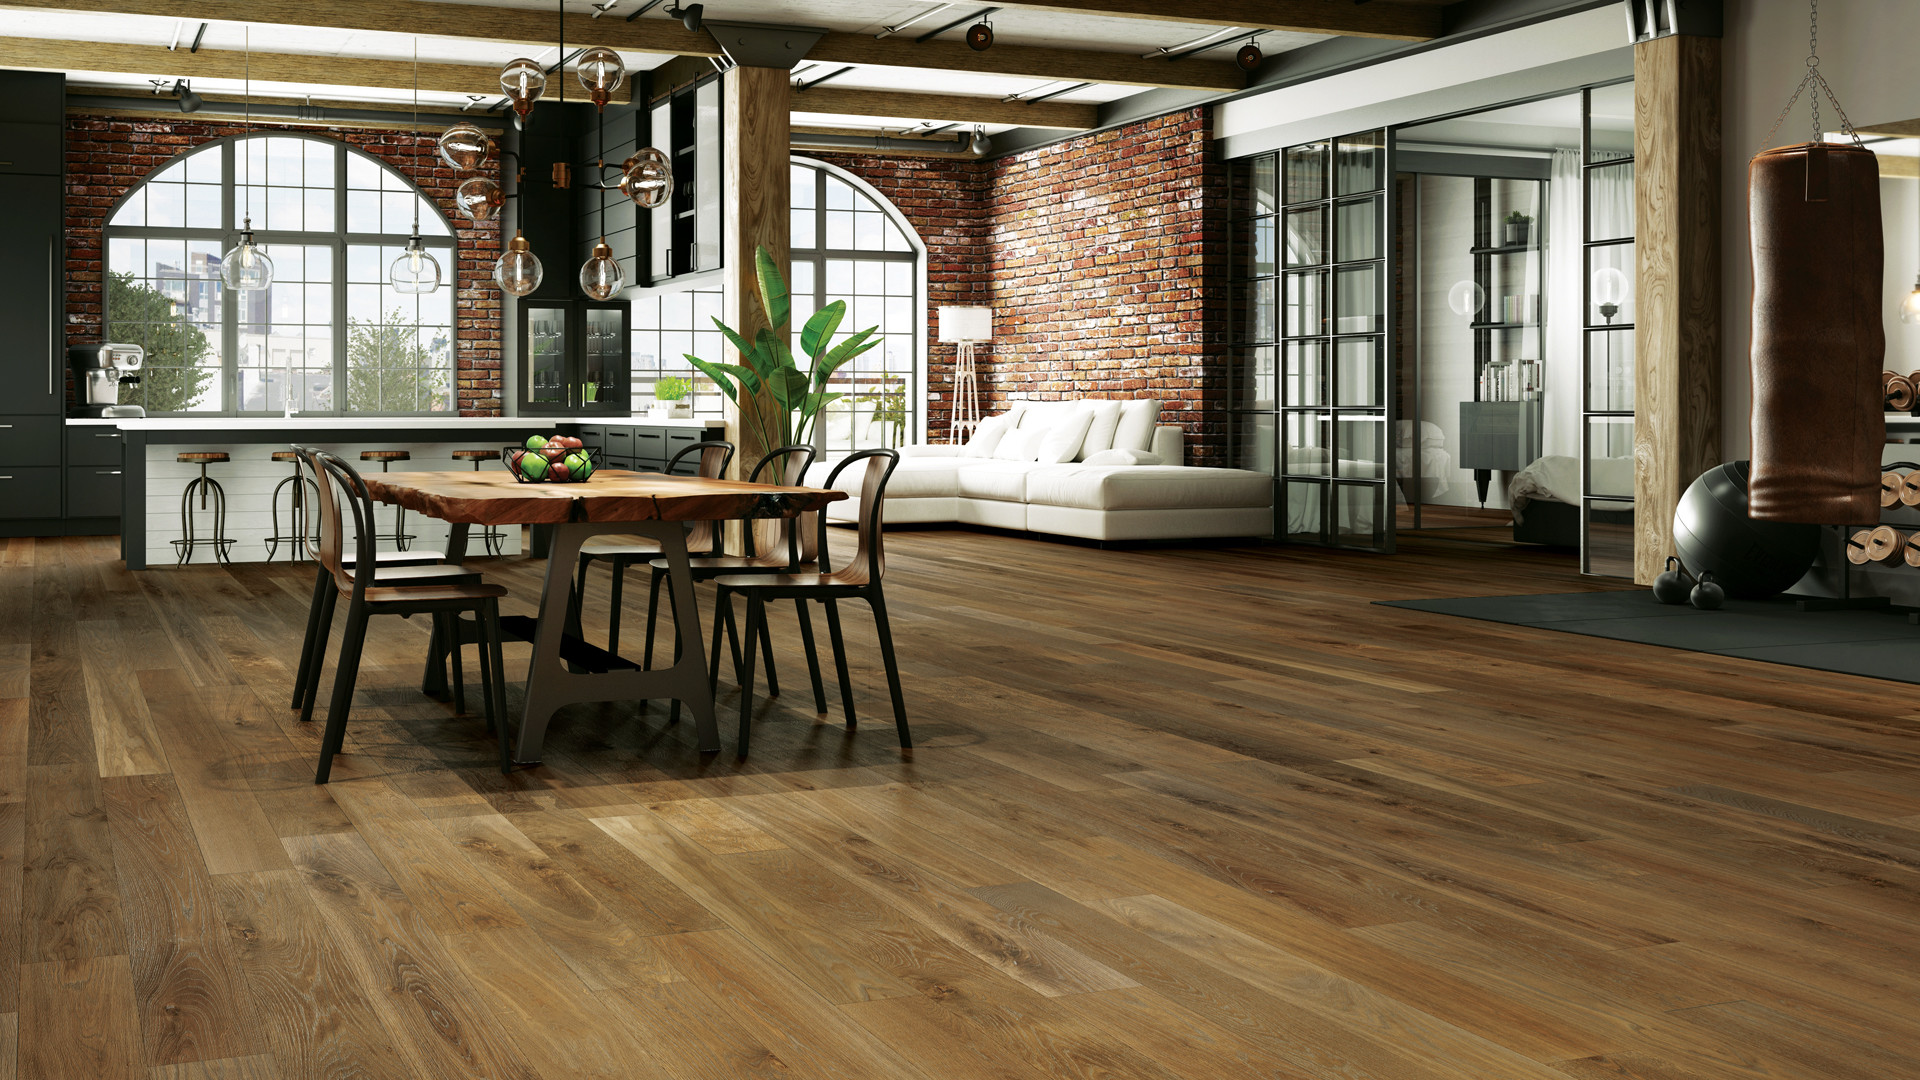 27 Fashionable Pictures Of White Oak Hardwood Floors 2024 free download pictures of white oak hardwood floors of 4 latest hardwood flooring trends of 2018 lauzon flooring with regard to combined with a wire brushed texture and an ultra matte sheen these new 7ac2